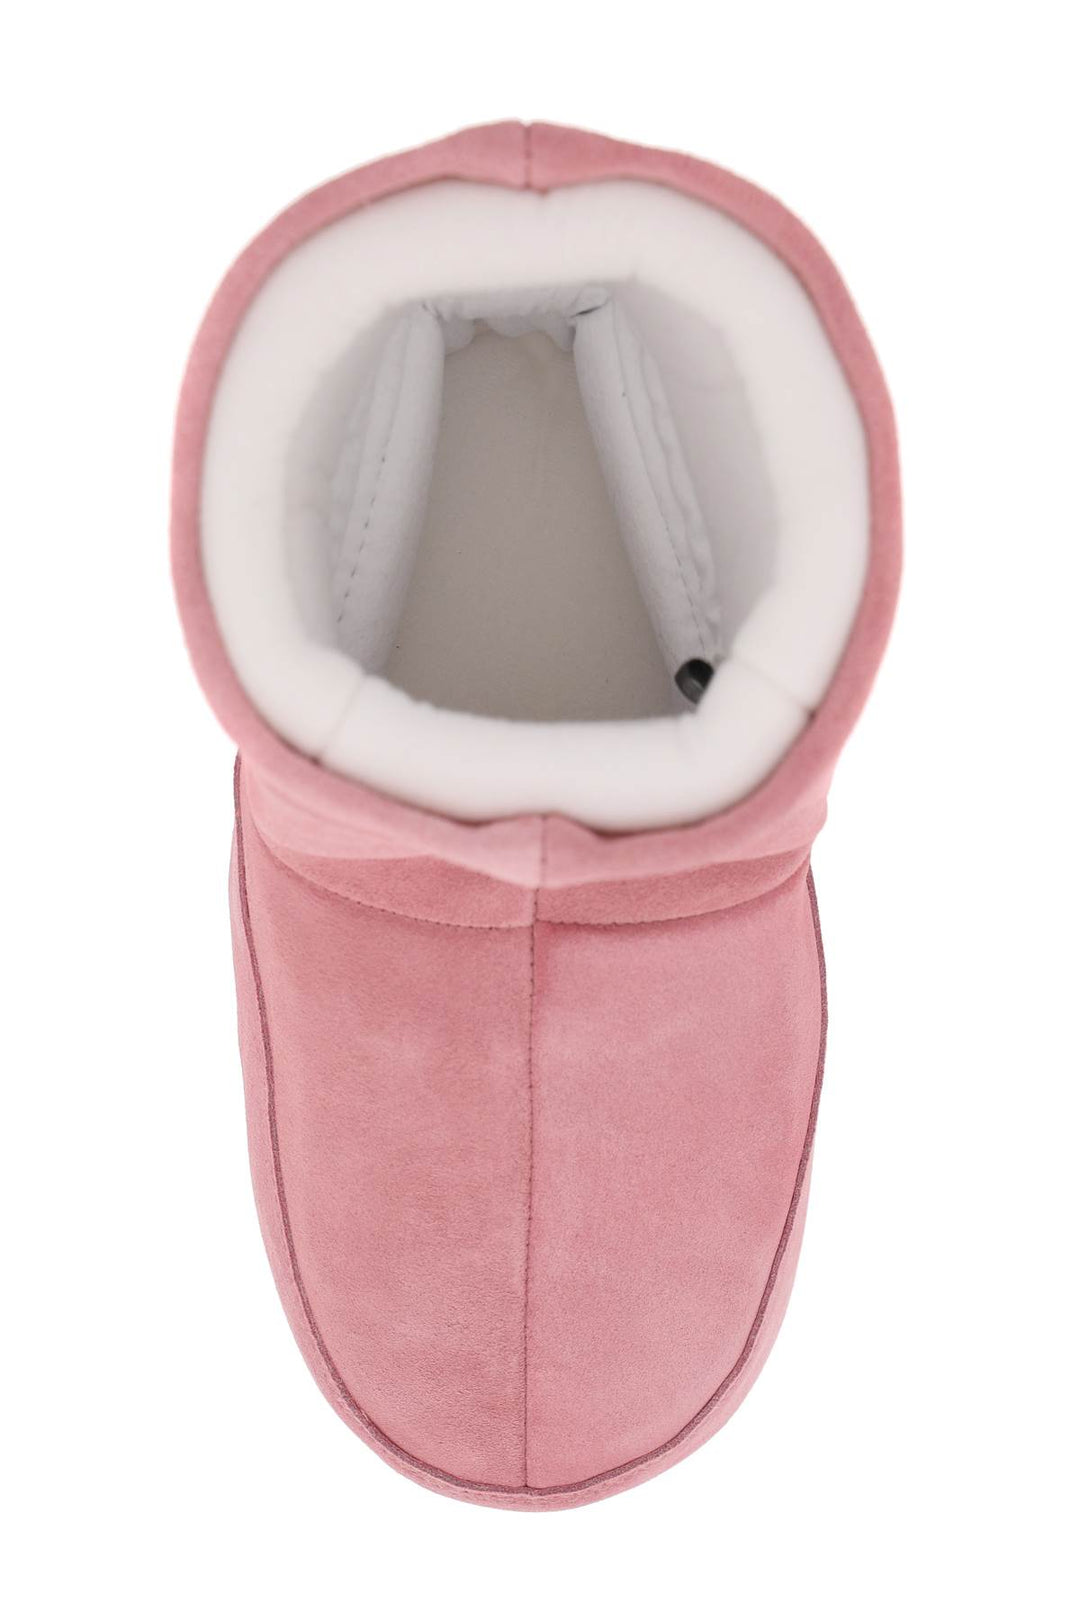 Moon Boot Icon Low Suede Snow Boots   Rosa